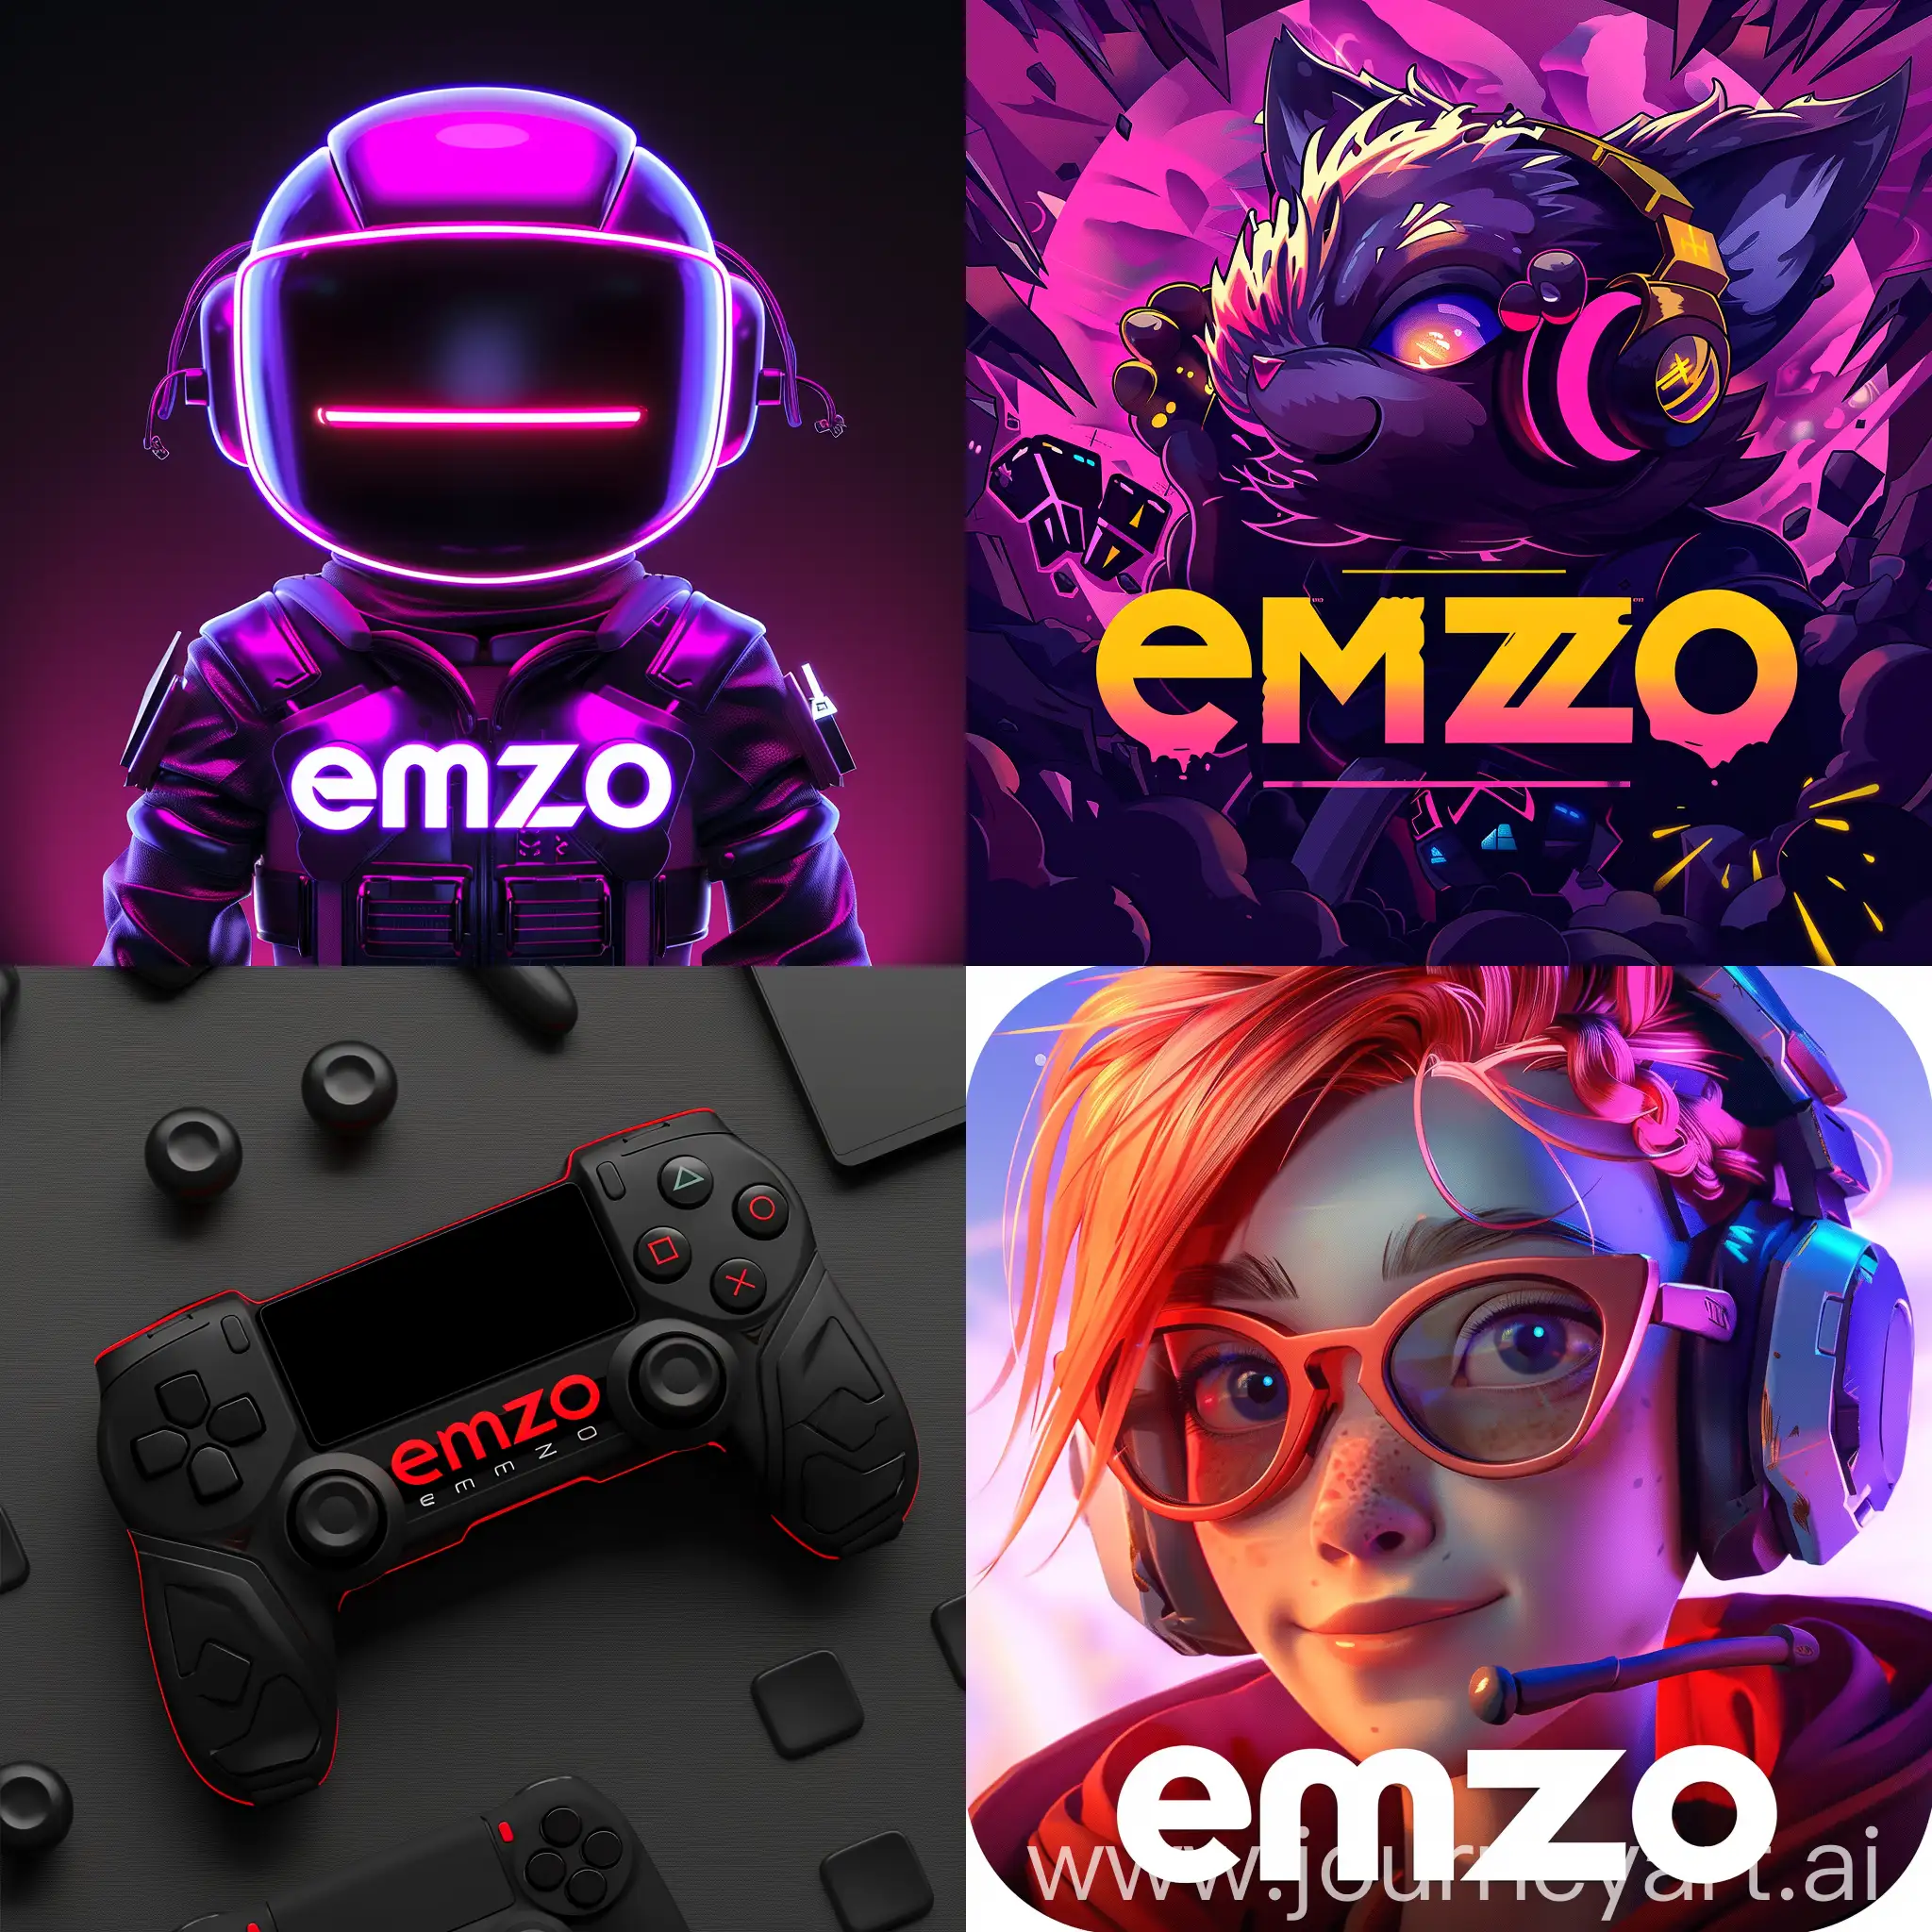 gaming theme with name "emzo"